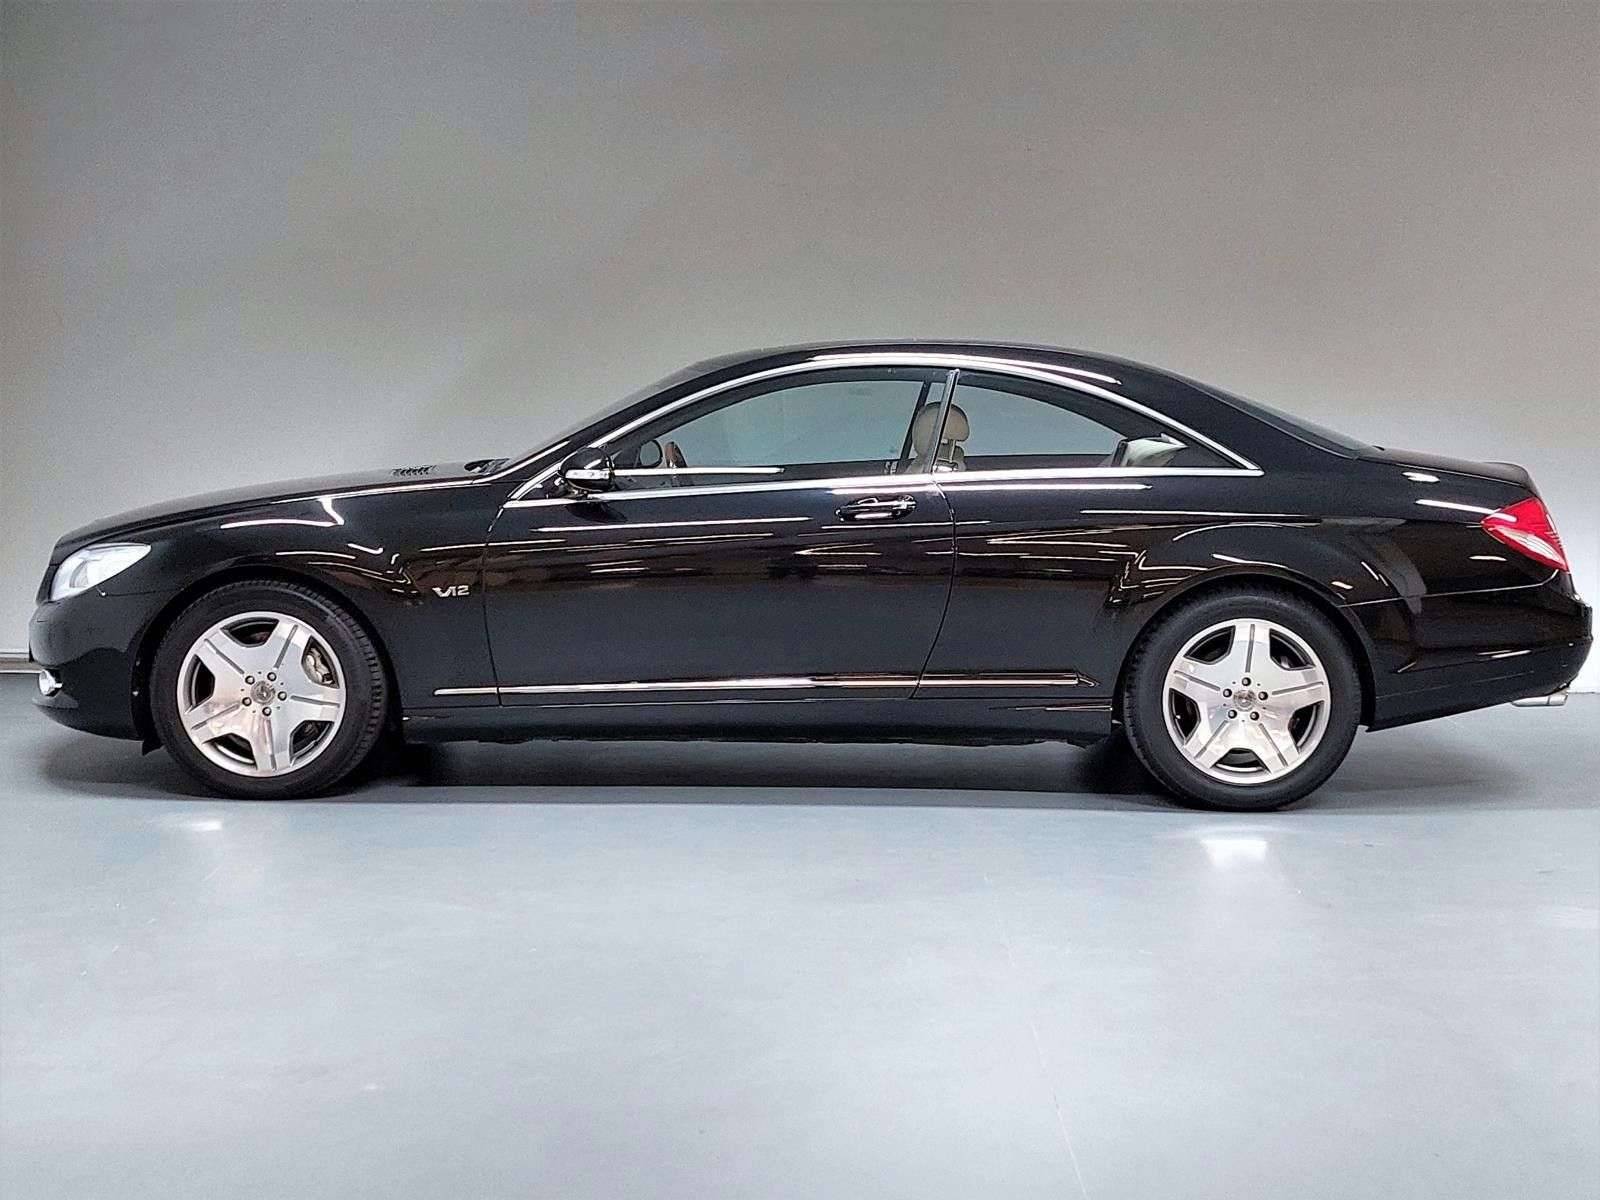 Cl 500 Amg Preis For Sale: Mercedes-Benz CL 600 (2008) offered for £21,376